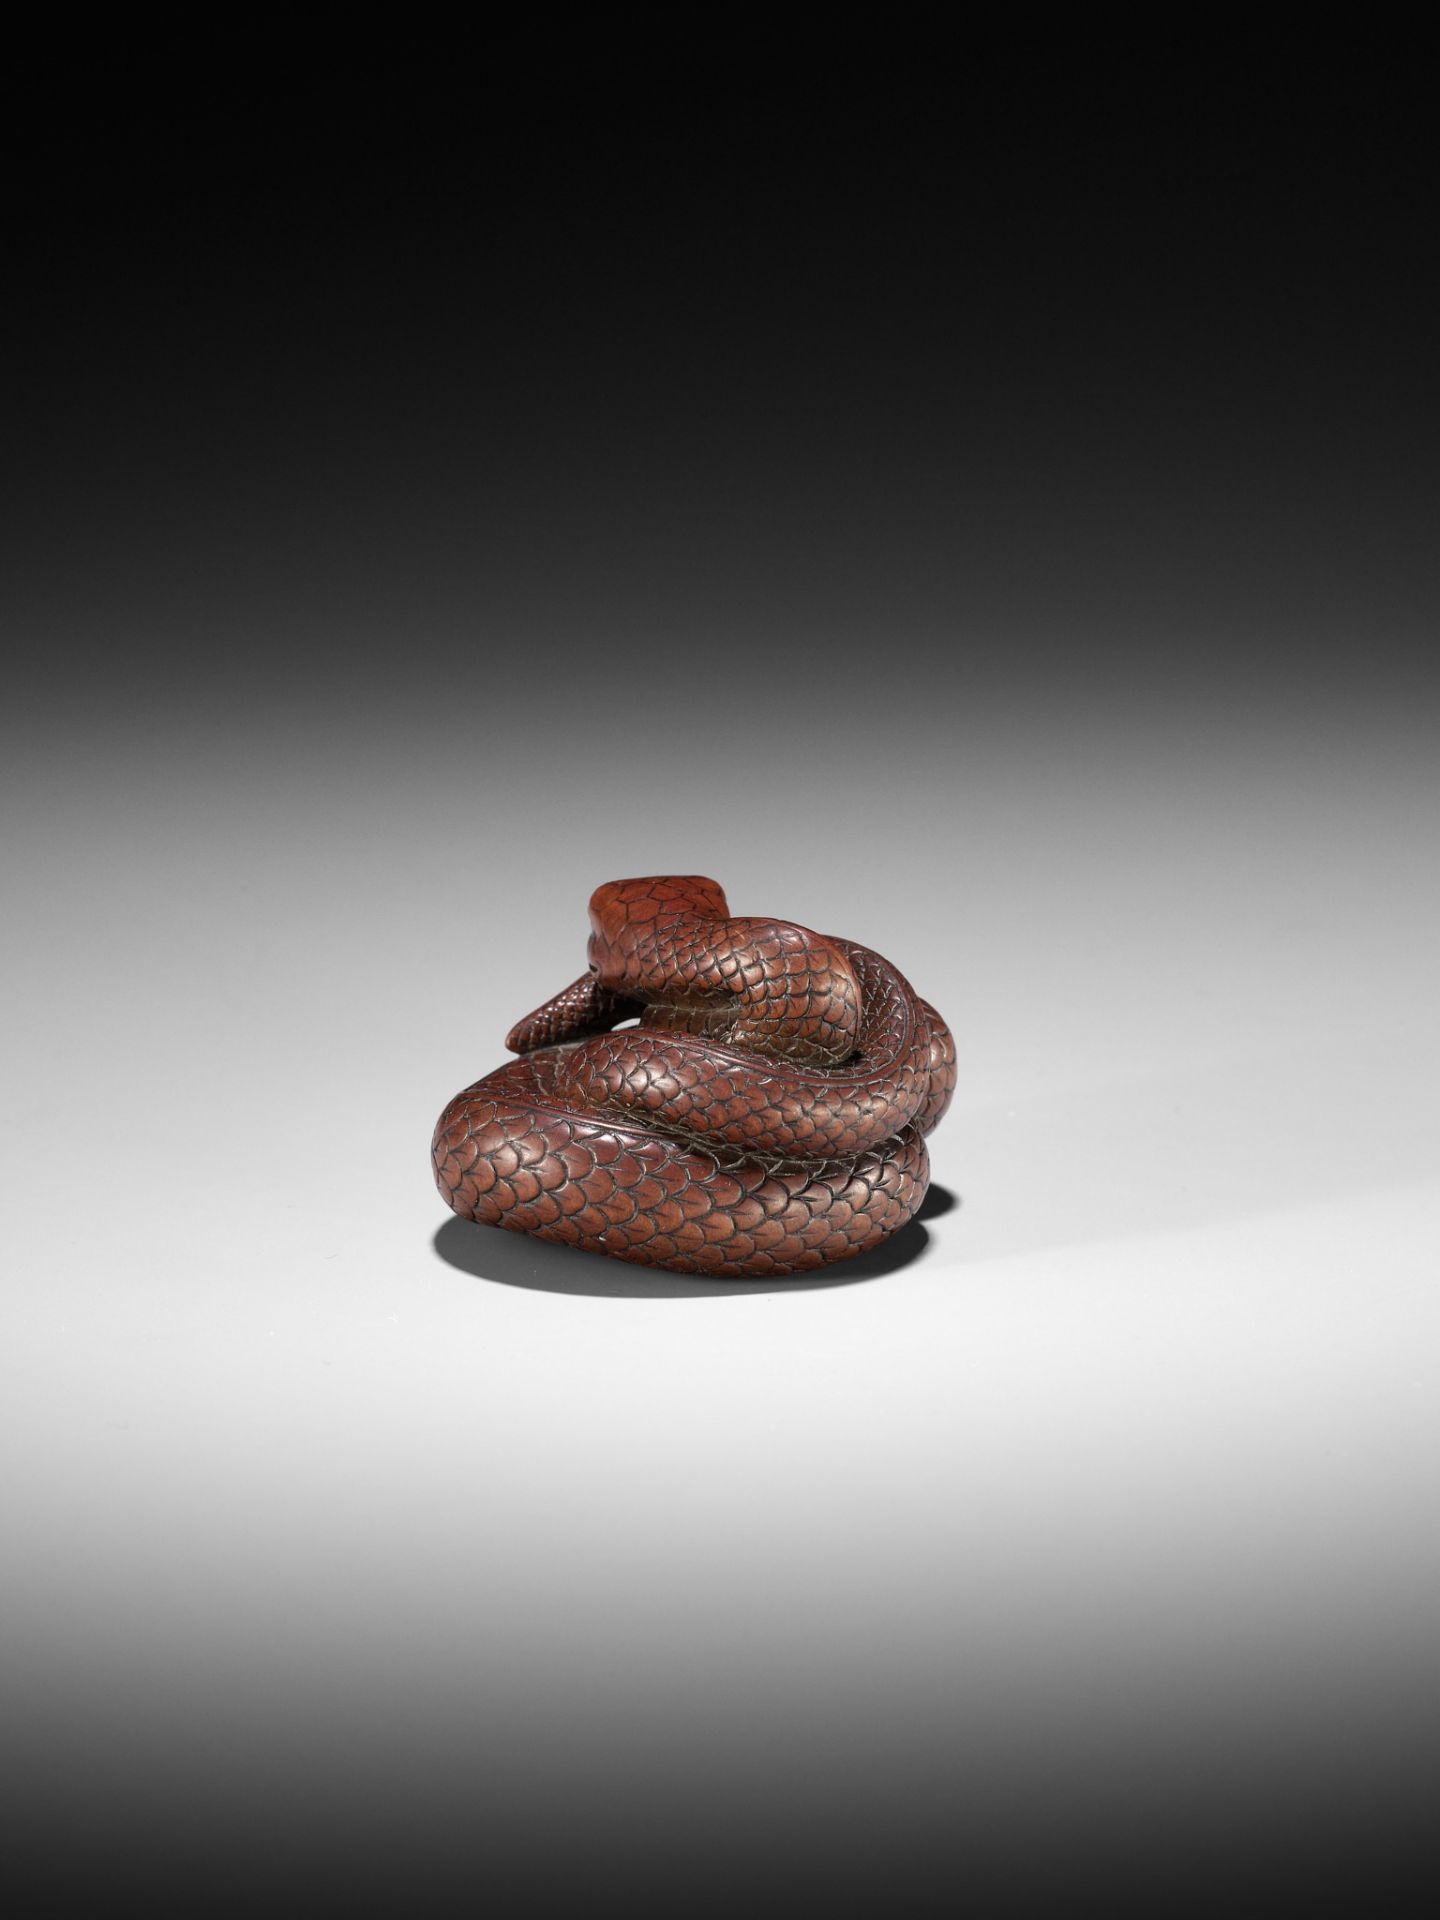 AN EXCEPTIONAL AND LARGE WOOD NETSUKE OF A SNAKE, ATTRIBUTED TO OKATOMO - Image 12 of 19